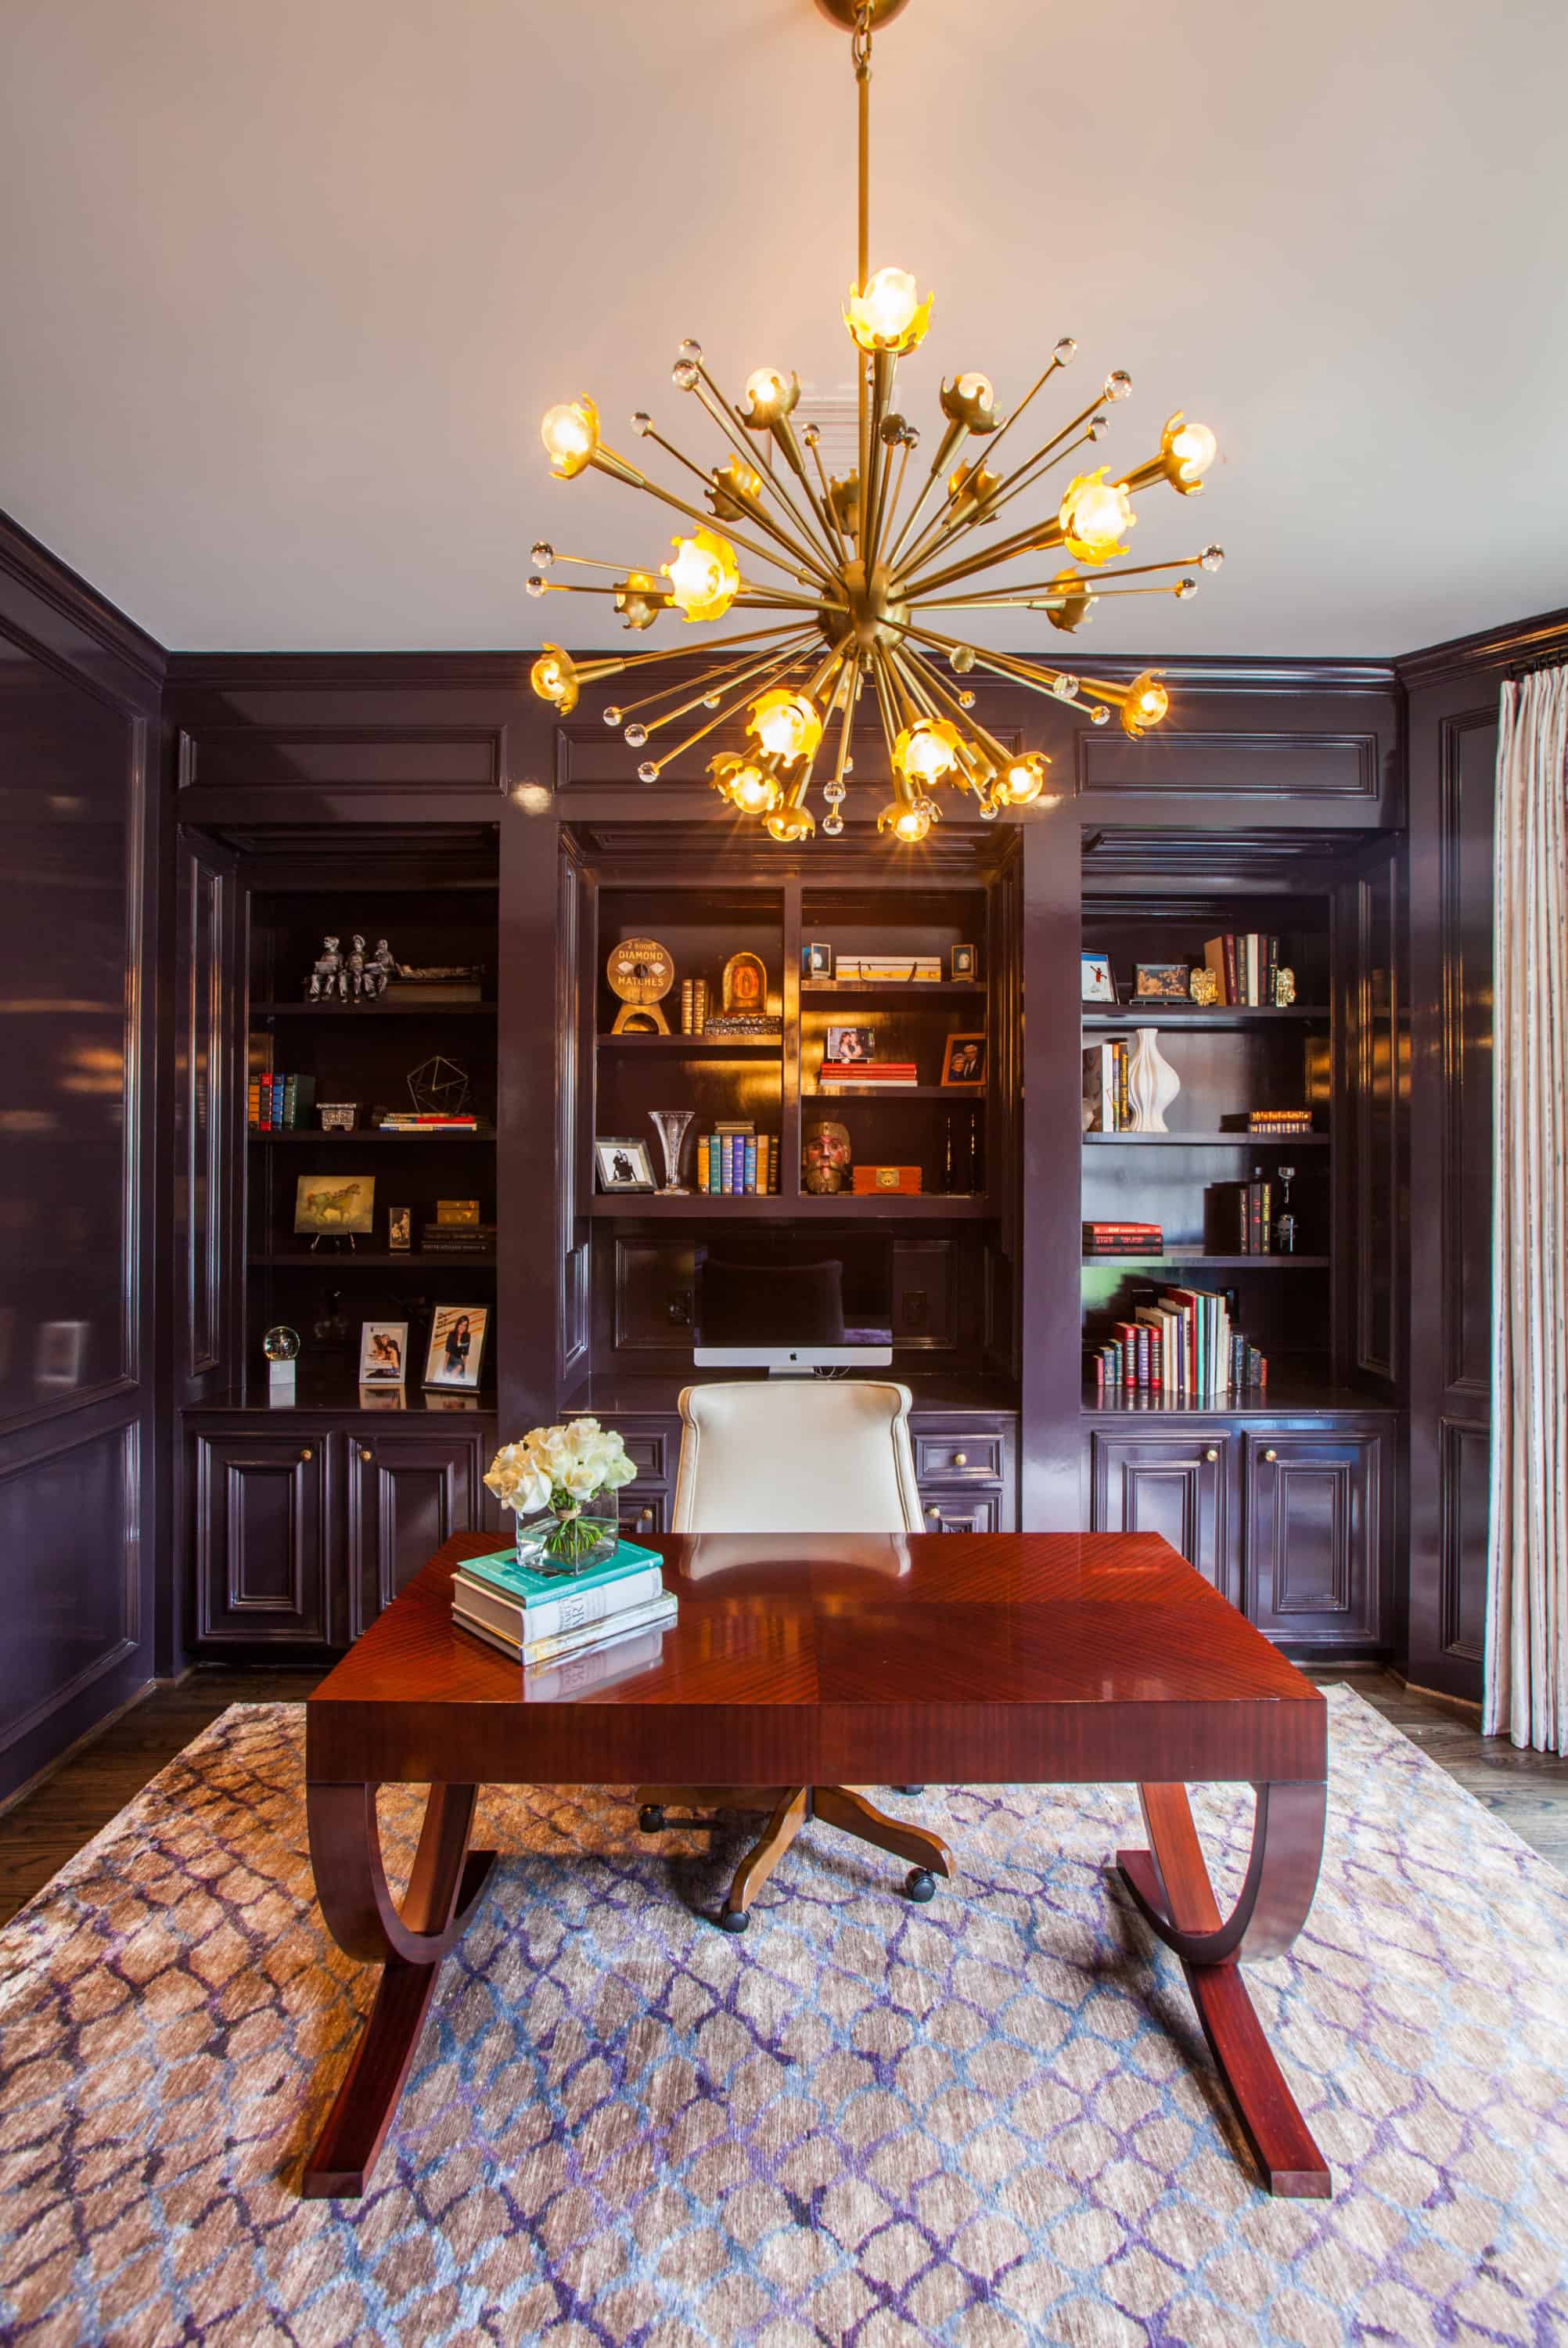 The Omni Executive chair from Century Furniture adds an elegant feel to this home office